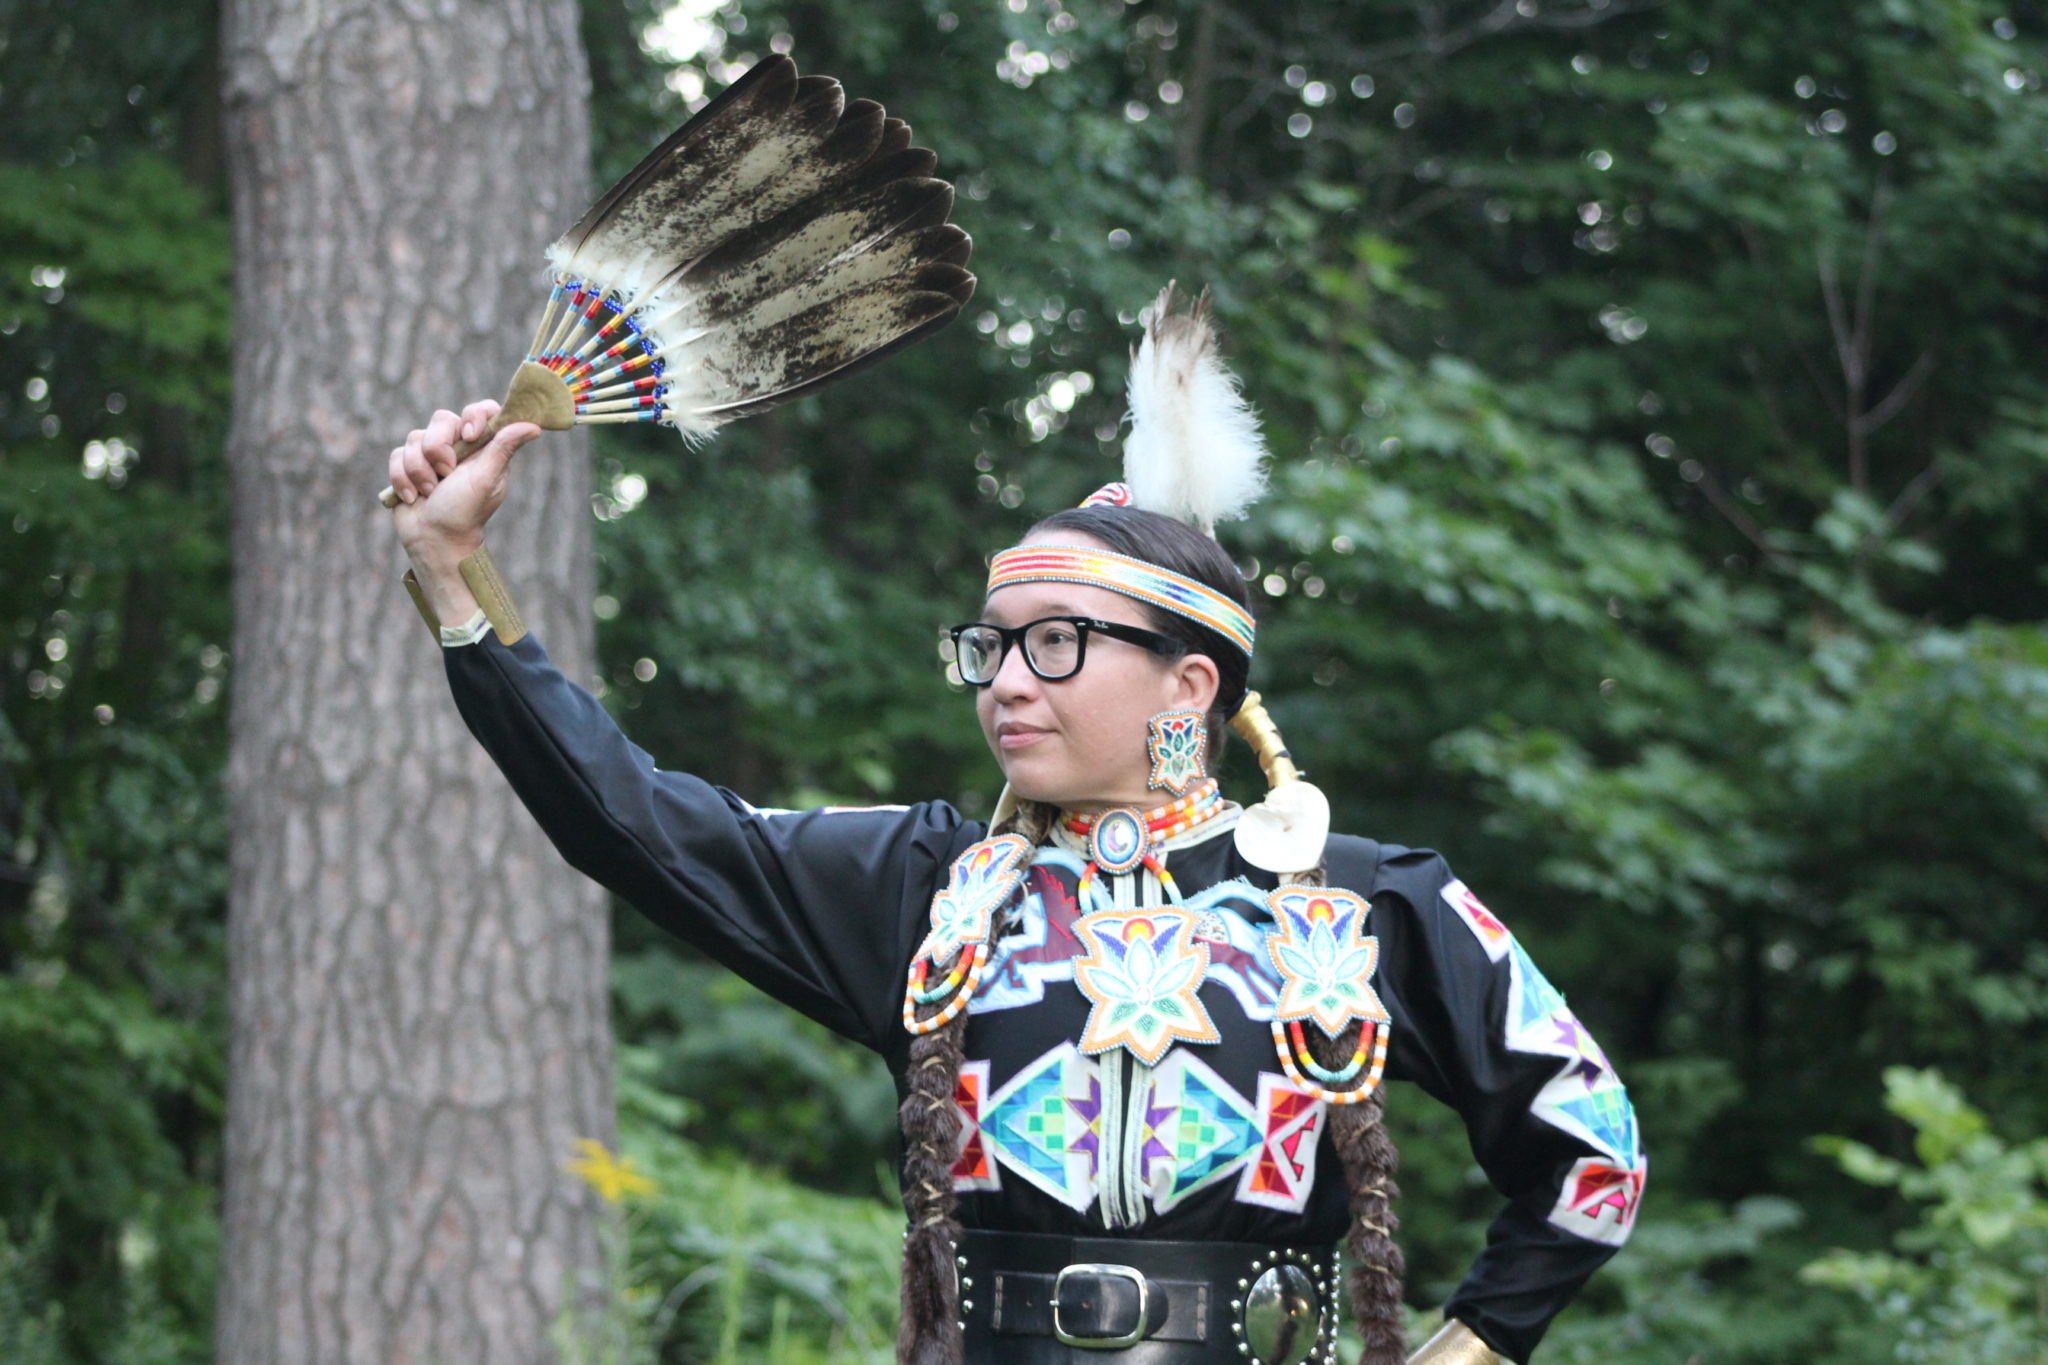 Kelli Marshall dances to honour residential school survivors and victims